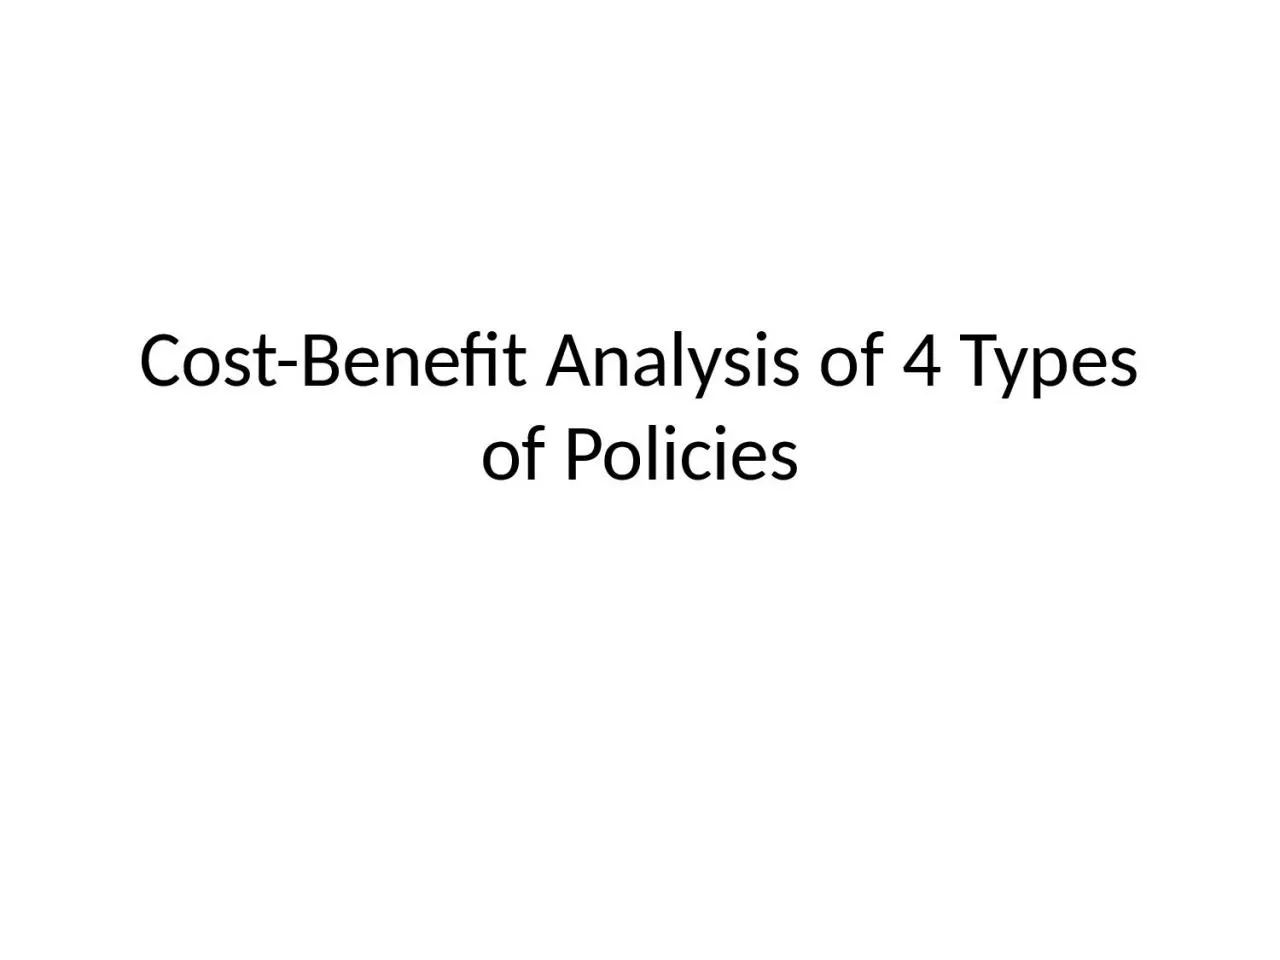 Cost-Benefit Analysis of 4 Types of Policies